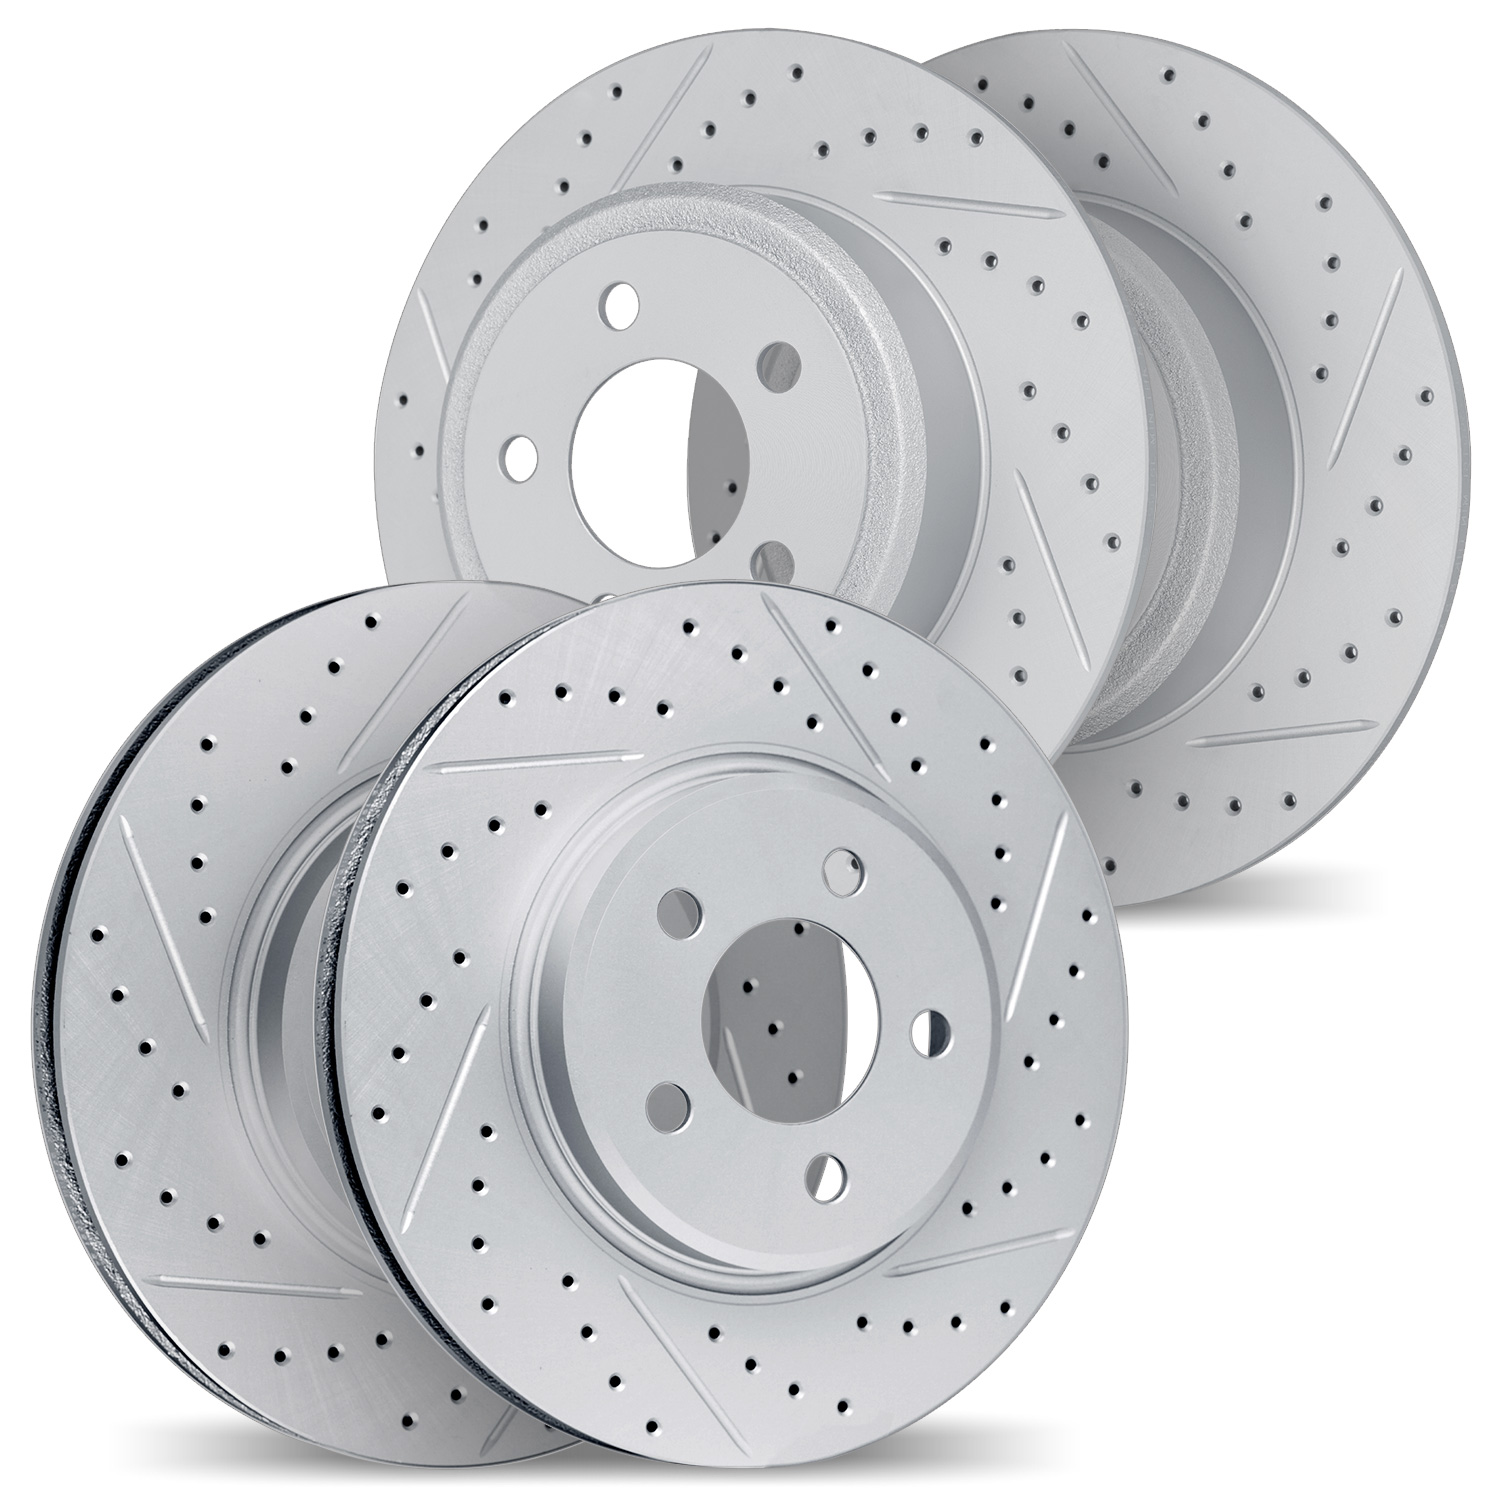 2004-21012 Geoperformance Drilled/Slotted Brake Rotors, 2015-2020 Kia/Hyundai/Genesis, Position: Front and Rear